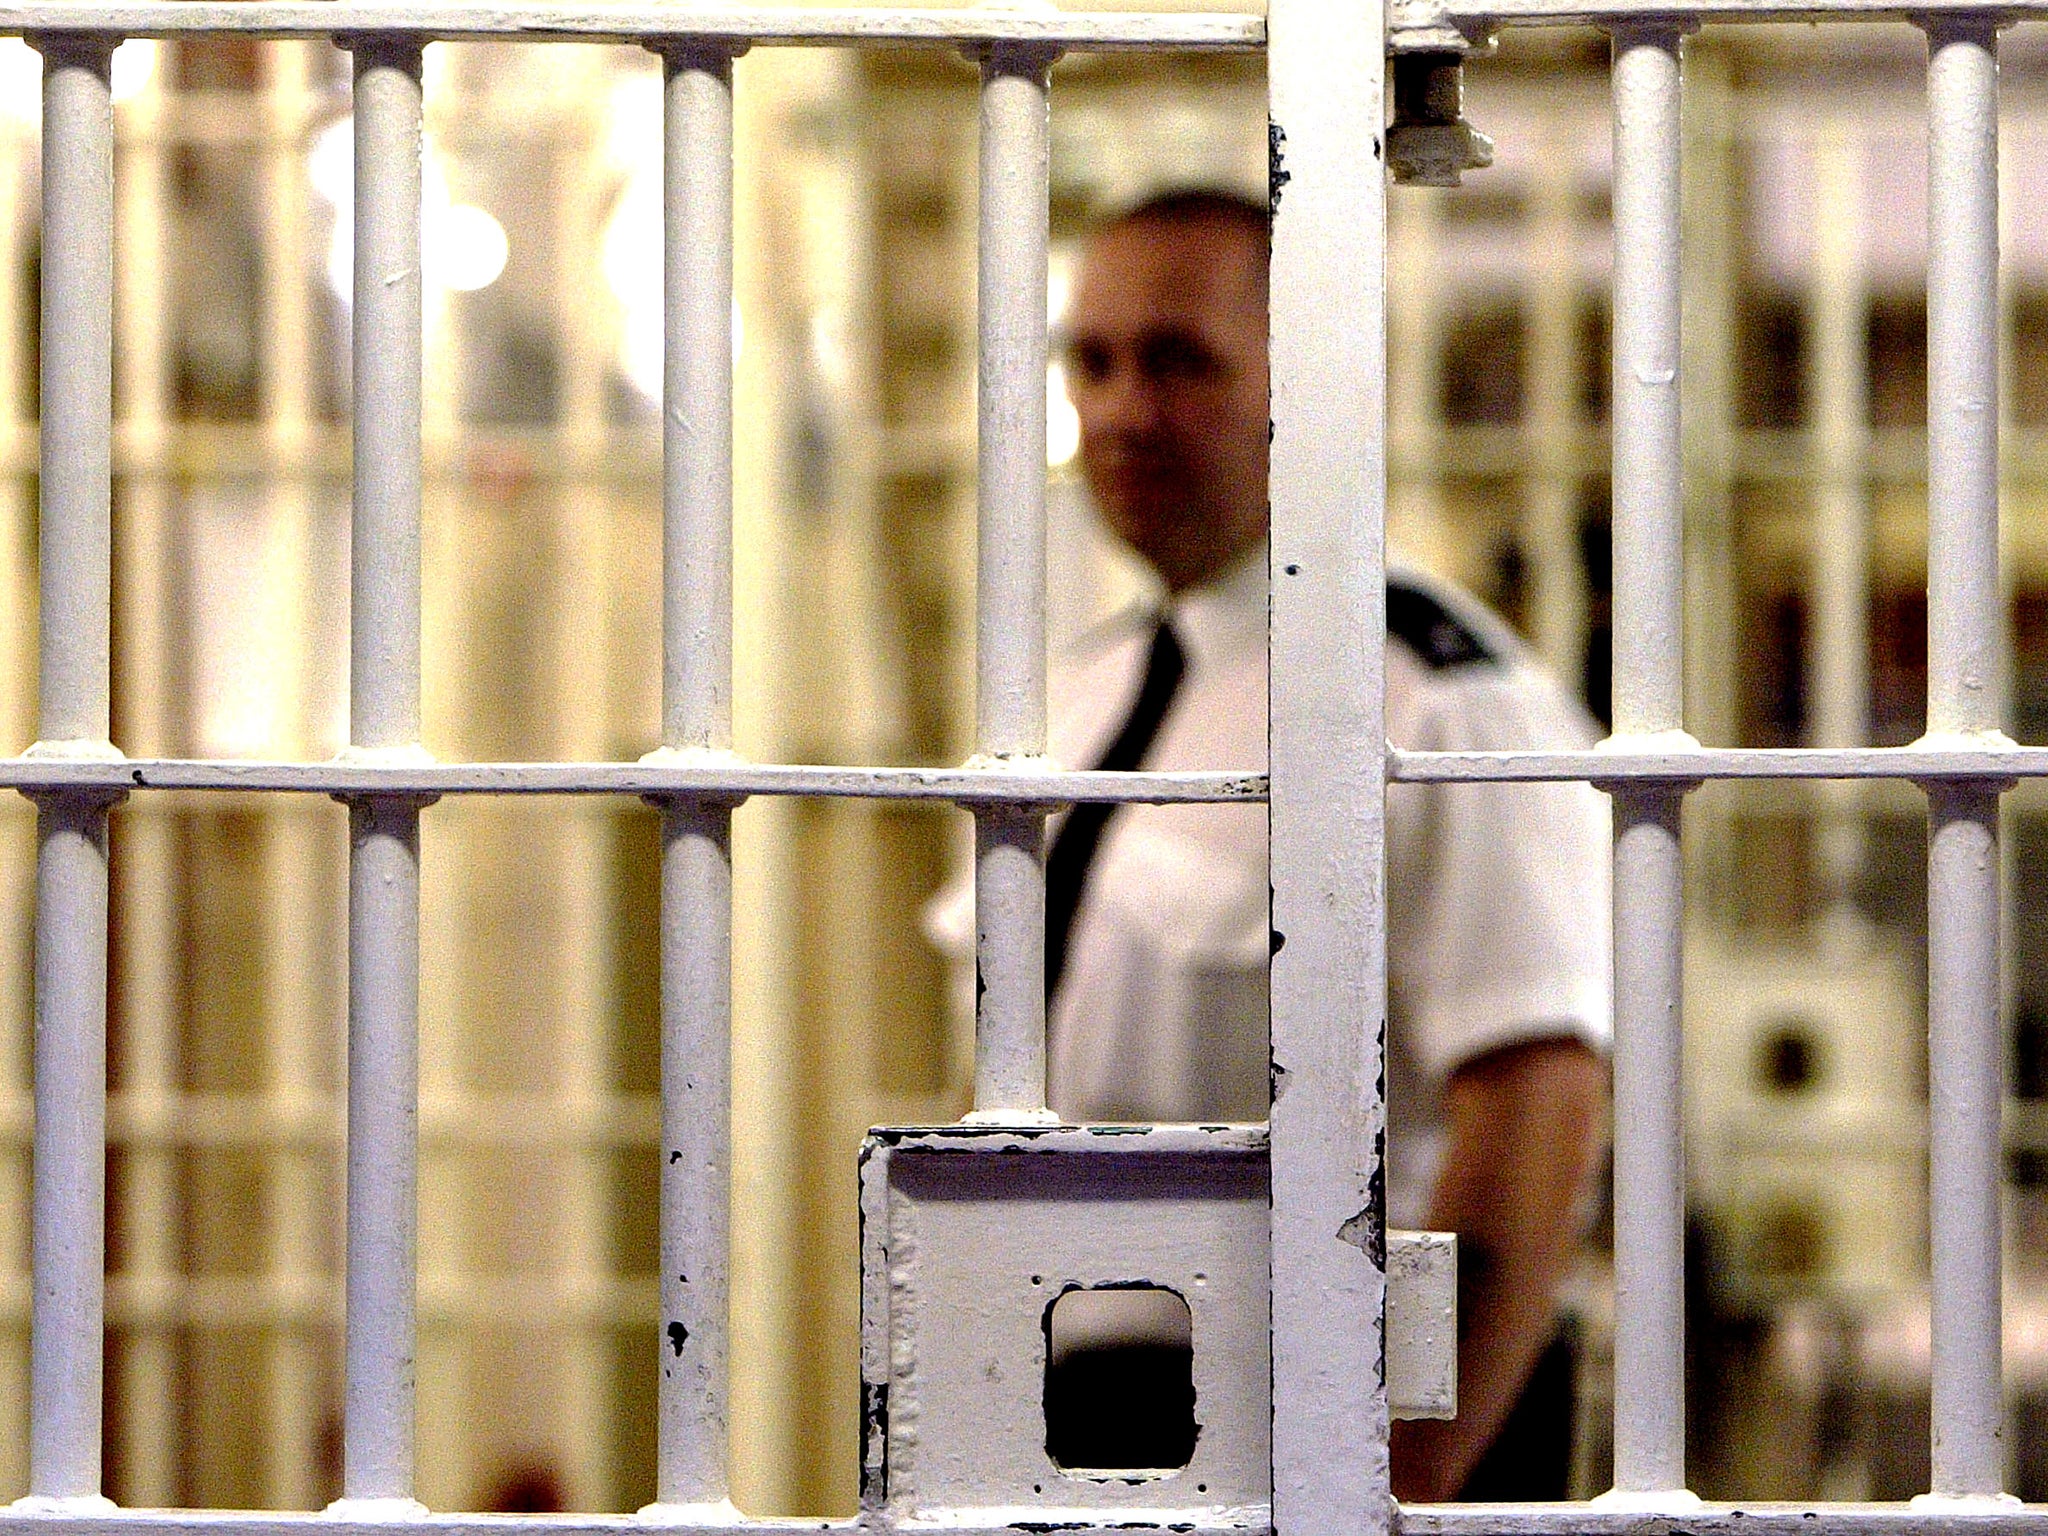 All deaths in prison, immigration detention and probation service approved premises, were up 25 per cent in 2013/14